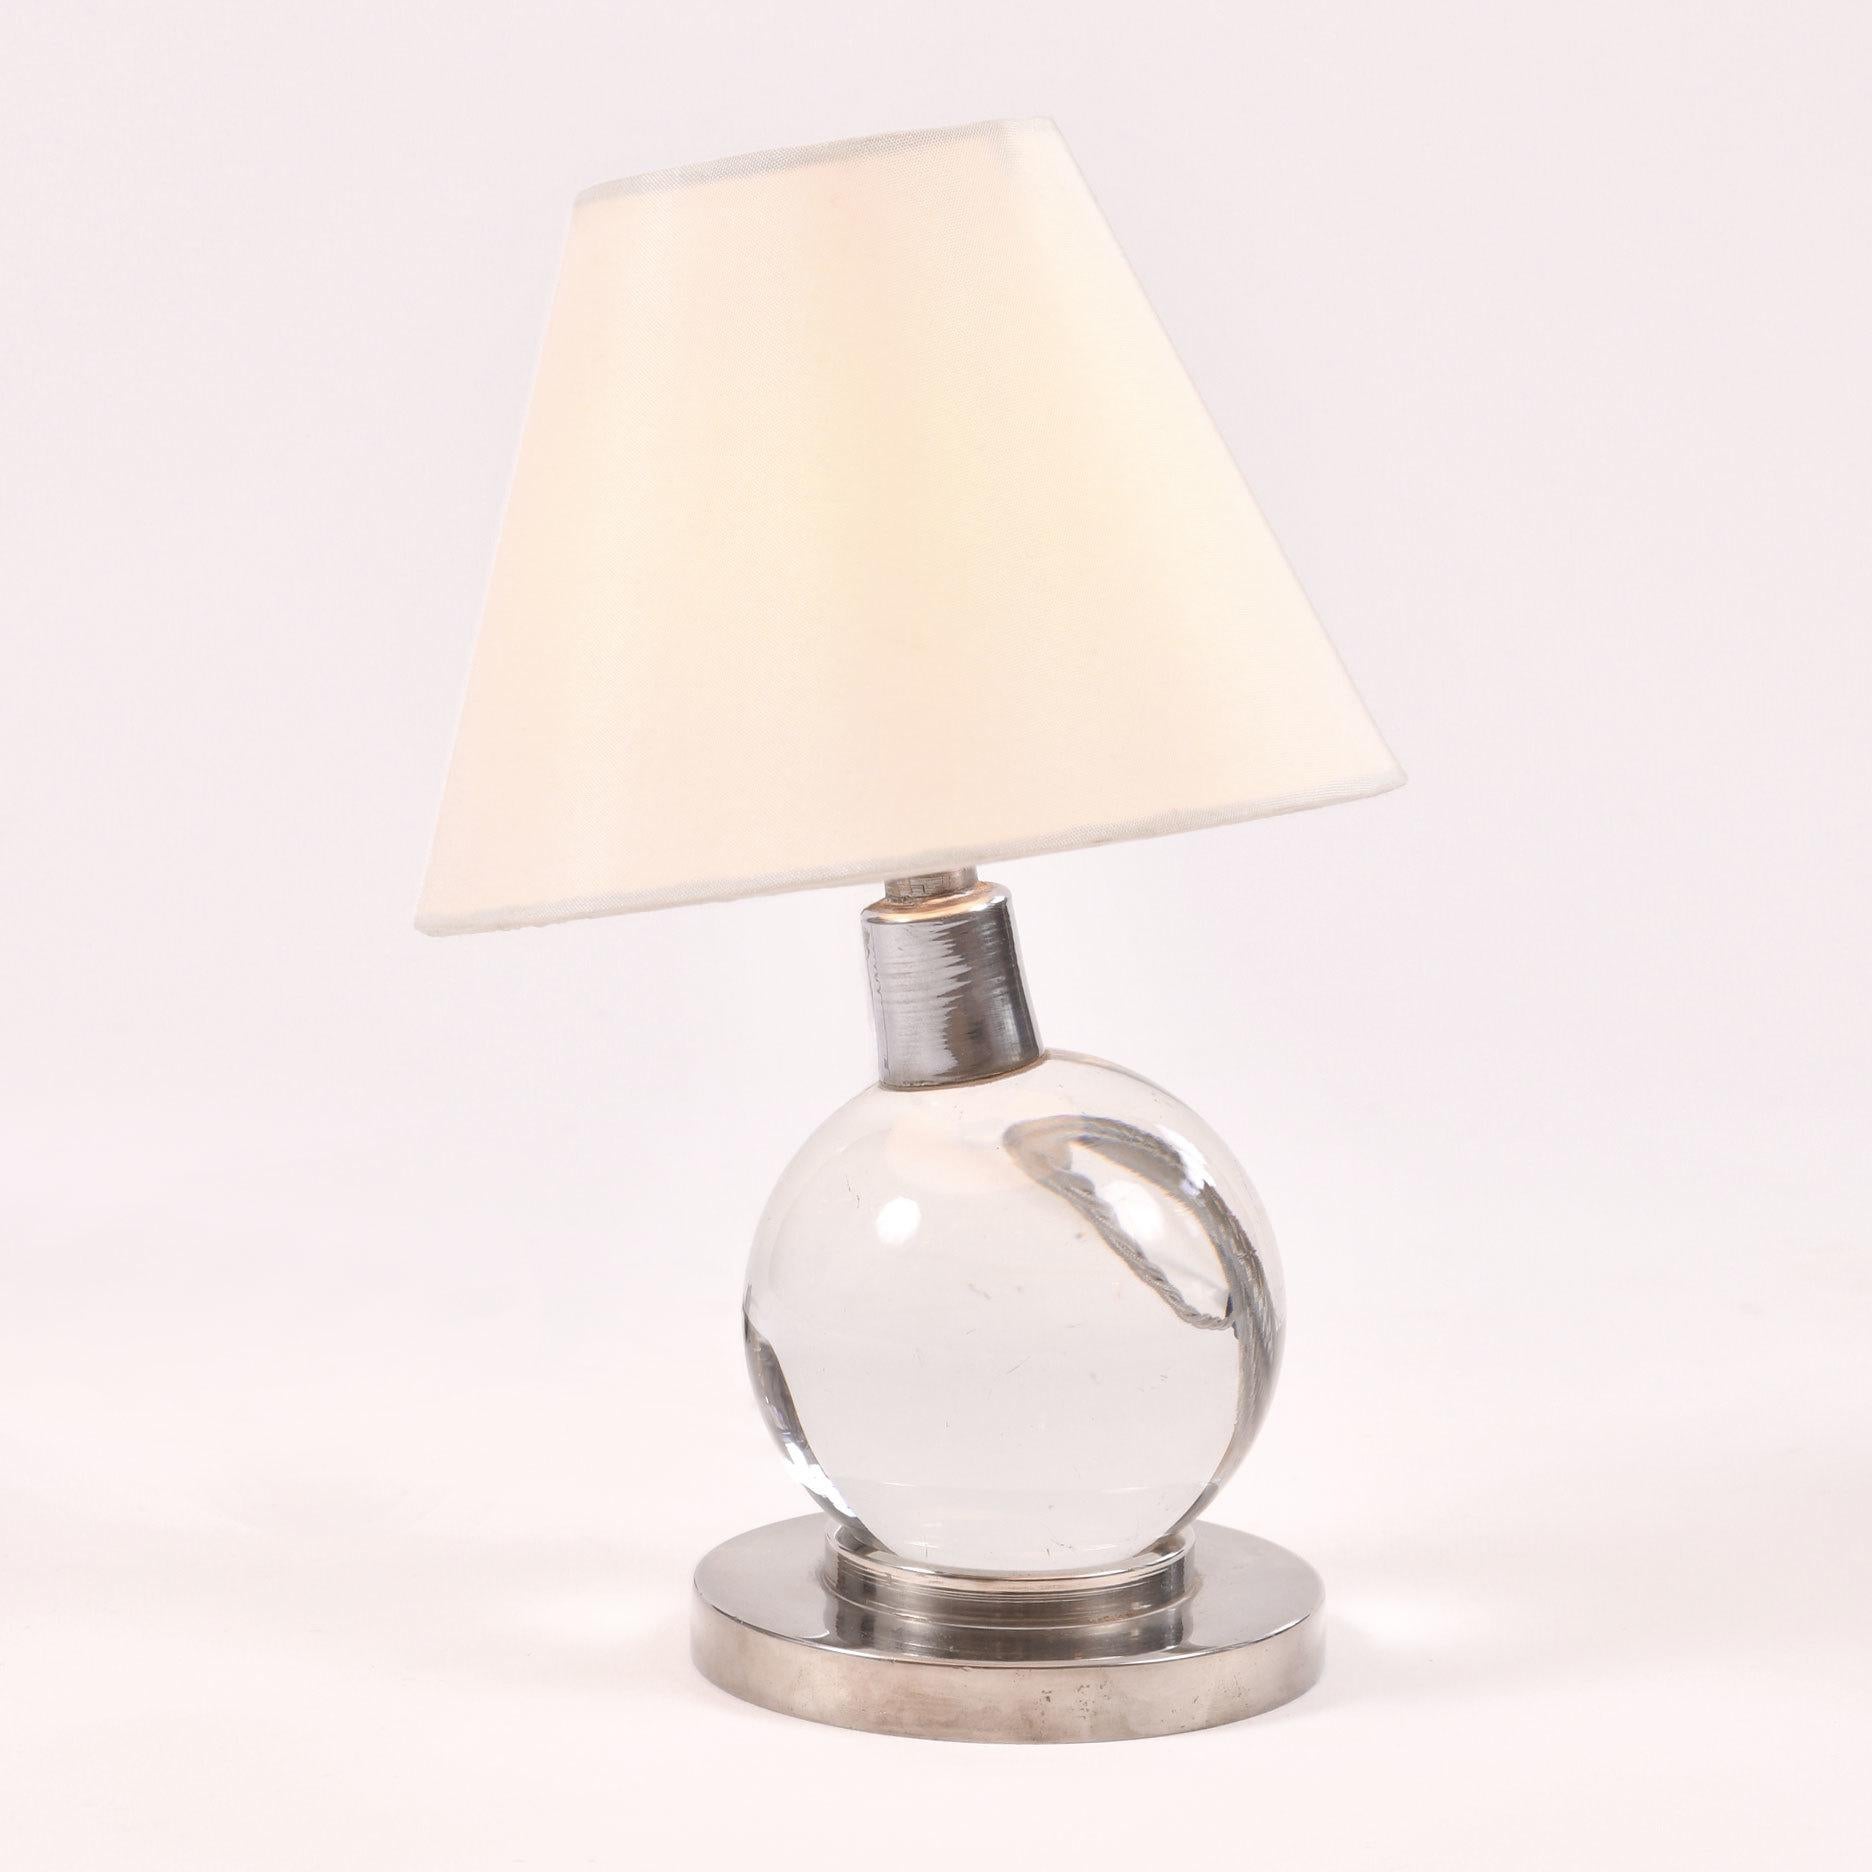 Classic design: Tilting crystal ball lamp on a circular chrome base.

Provenance: Private Collection, Buenos Aires – recently brought over to the UK.

Jacques Adnet (1900–1984) understood the beauty of combining practicality with geometric